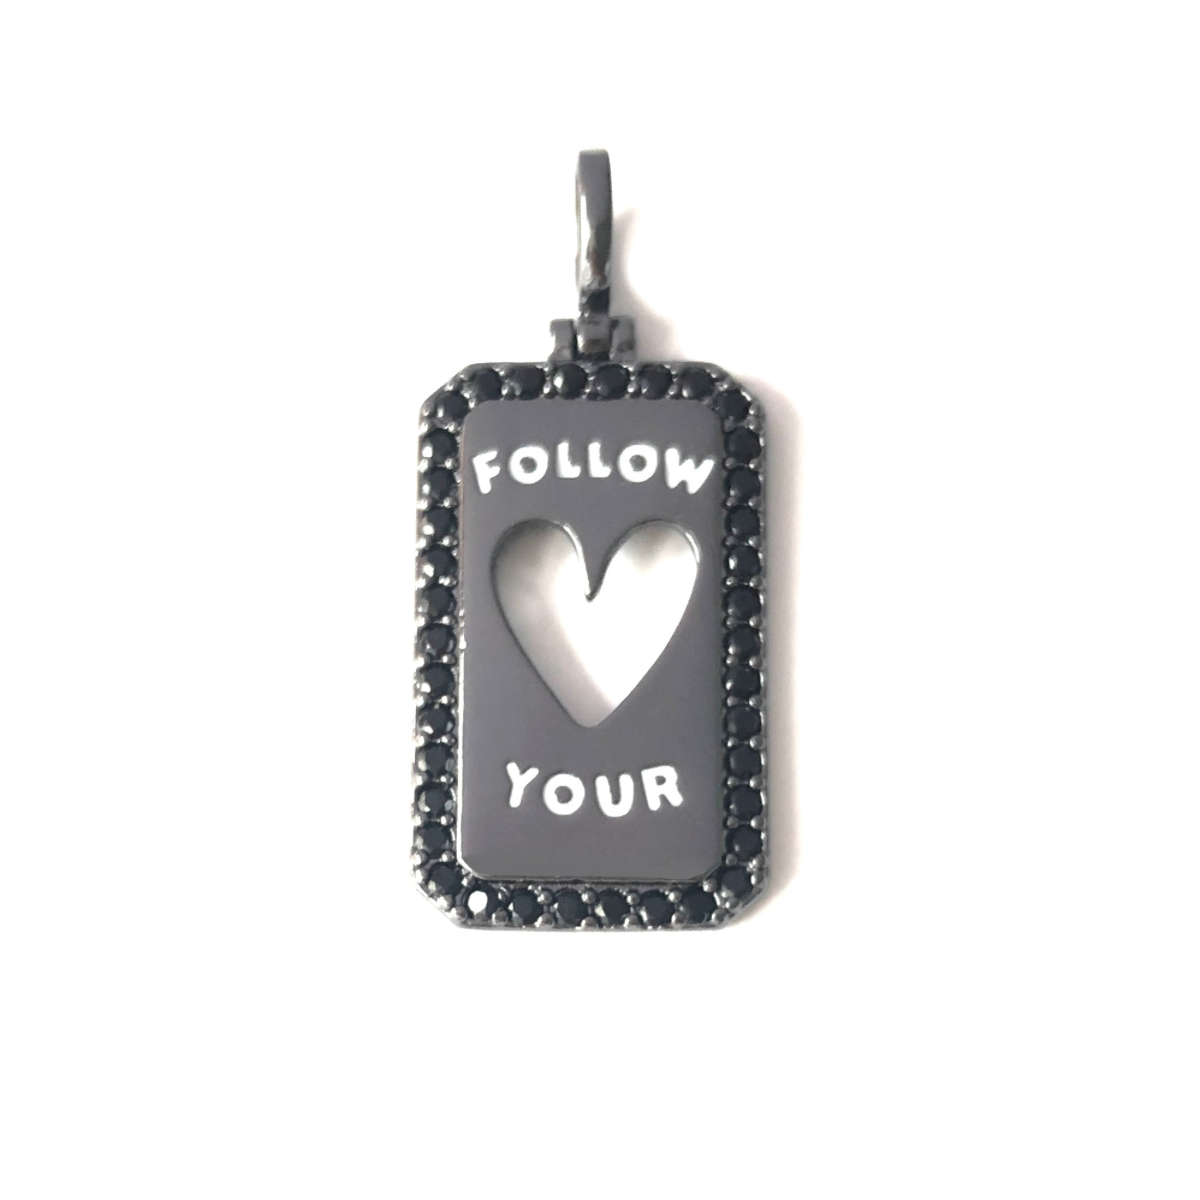 10pcs/lot 38*17mm CZ Paved Follow Your Heart Word Tags Charms Pendants Black on Black CZ Paved Charms Christian Quotes New Charms Arrivals Word Tags Charms Beads Beyond